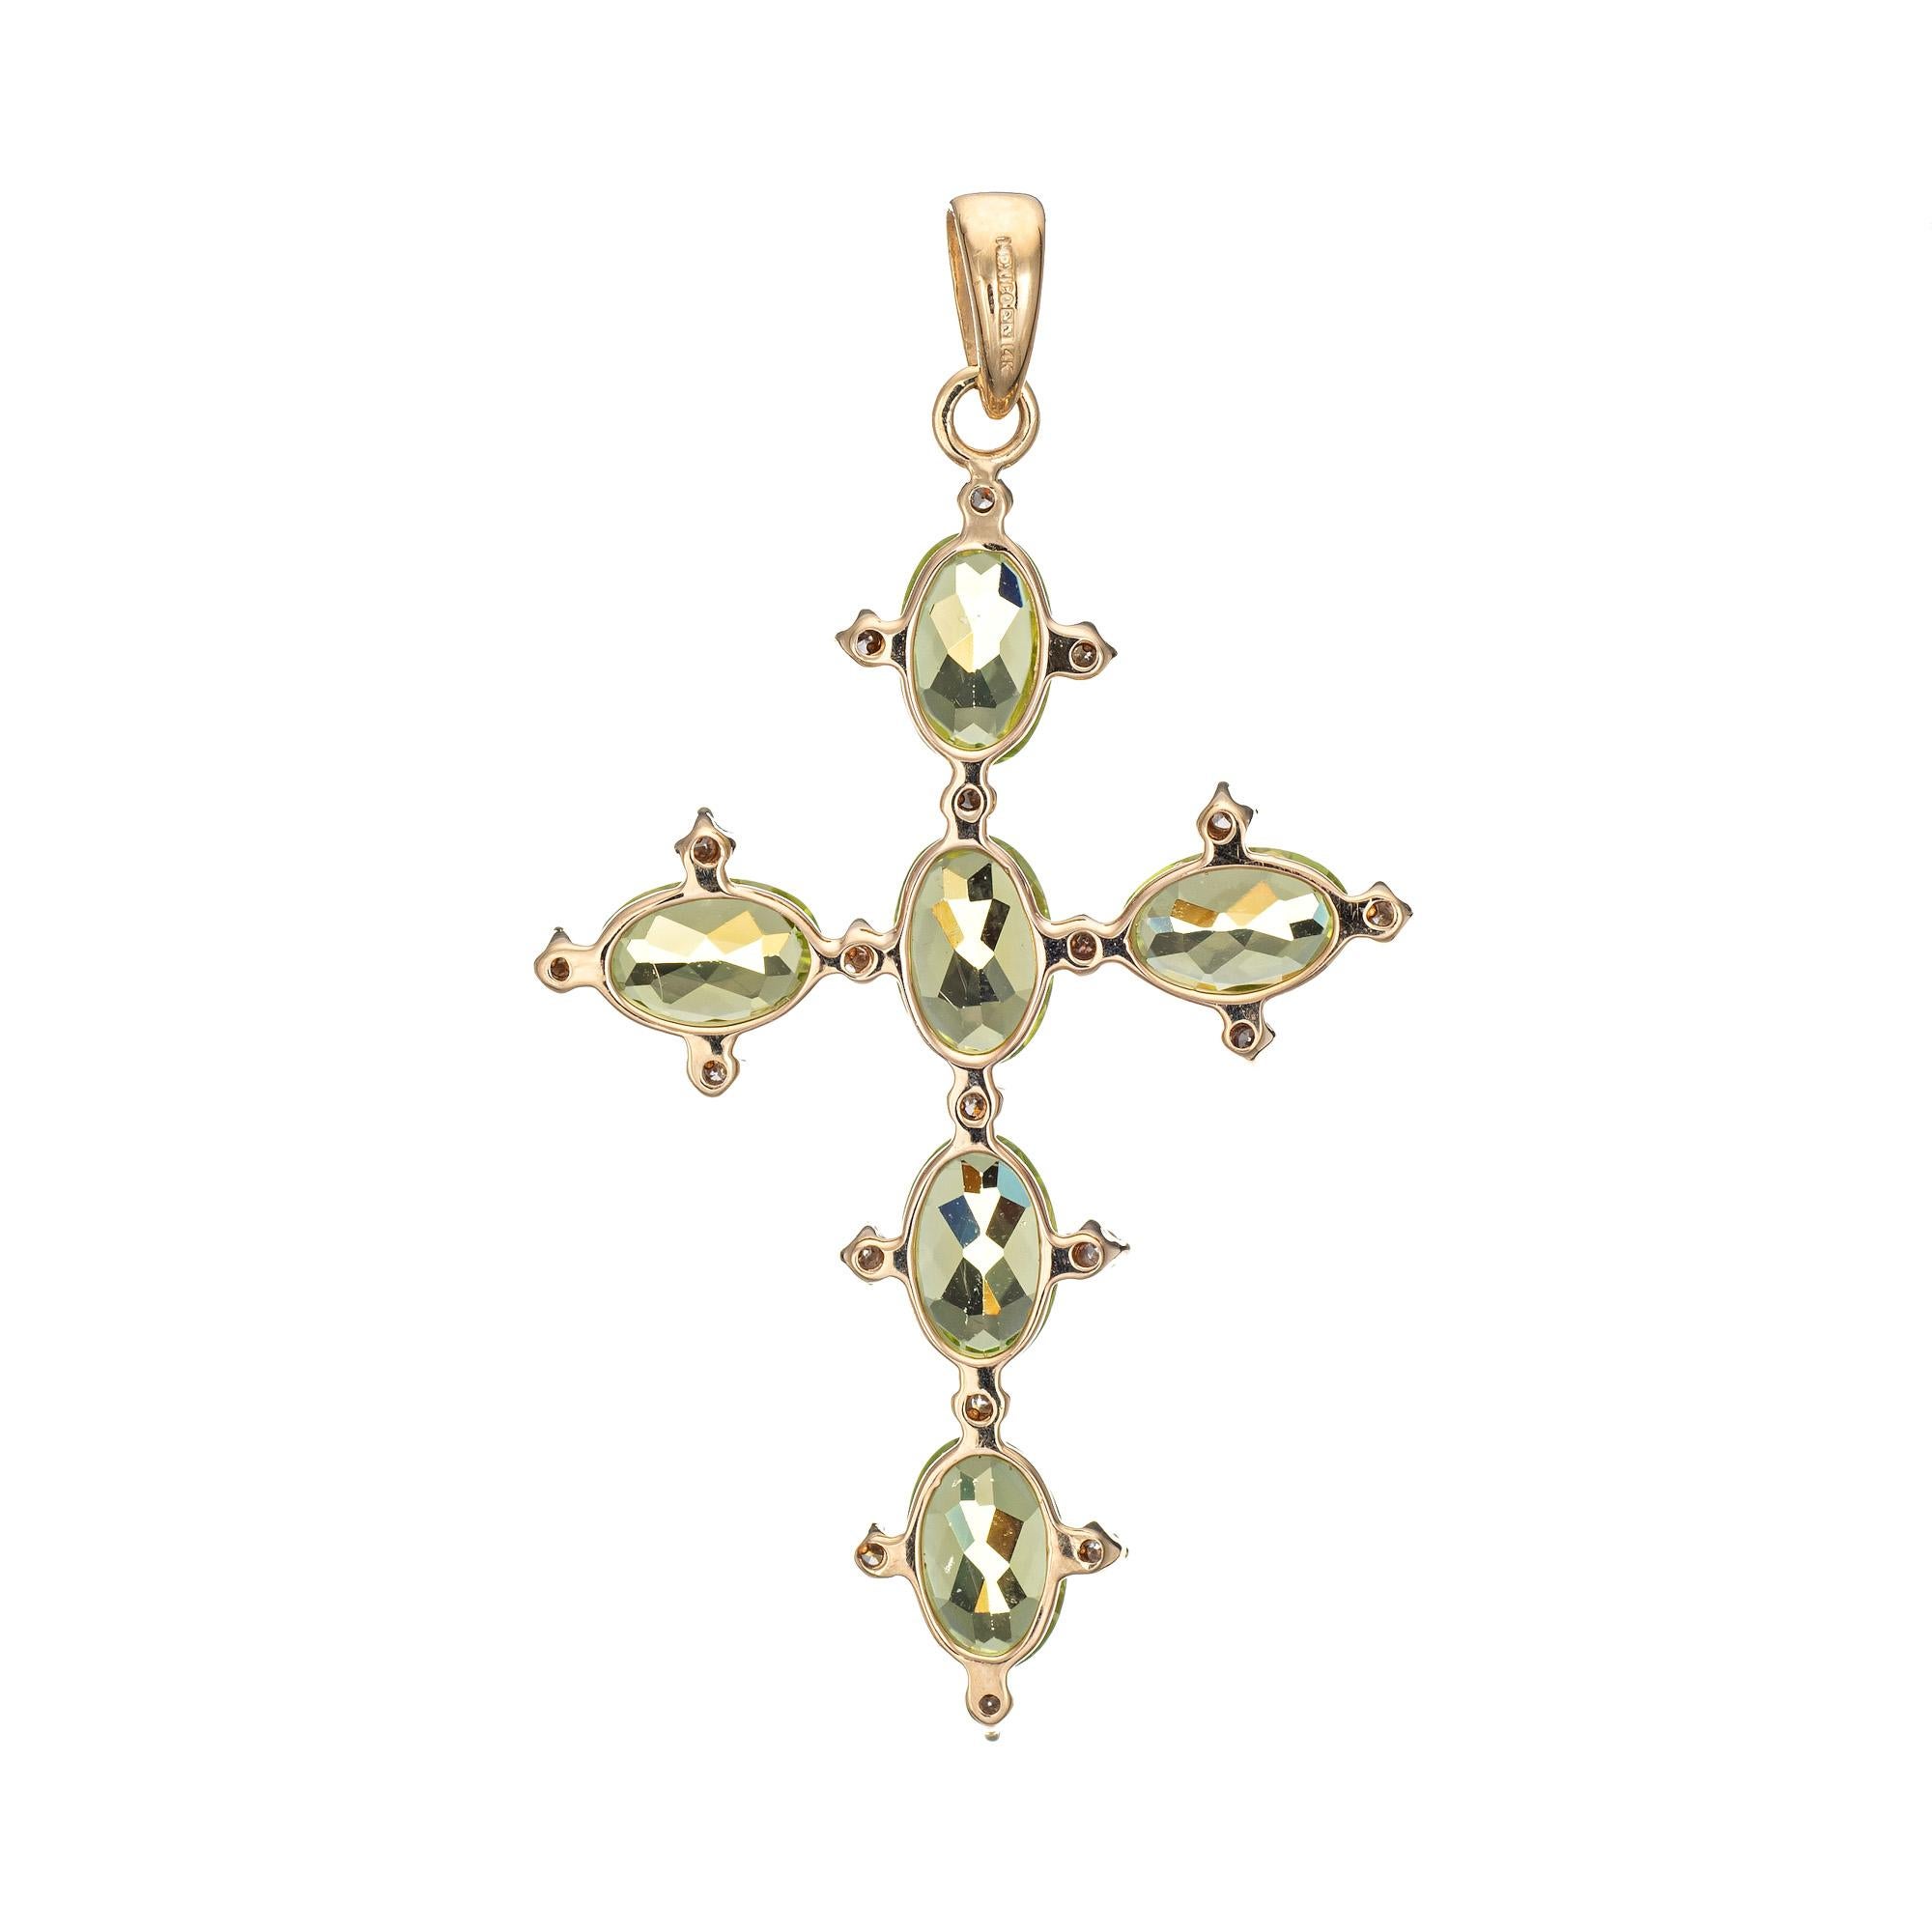 Finely detailed peridot & diamond cross pendant crafted in 14k yellow gold. 

6 oval faceted peridot measures 6mm x 4mm (estimated at 0.50 carats each - 3 carats total estimated weight), accented with an estimated 0.09 carats of diamonds (estimated